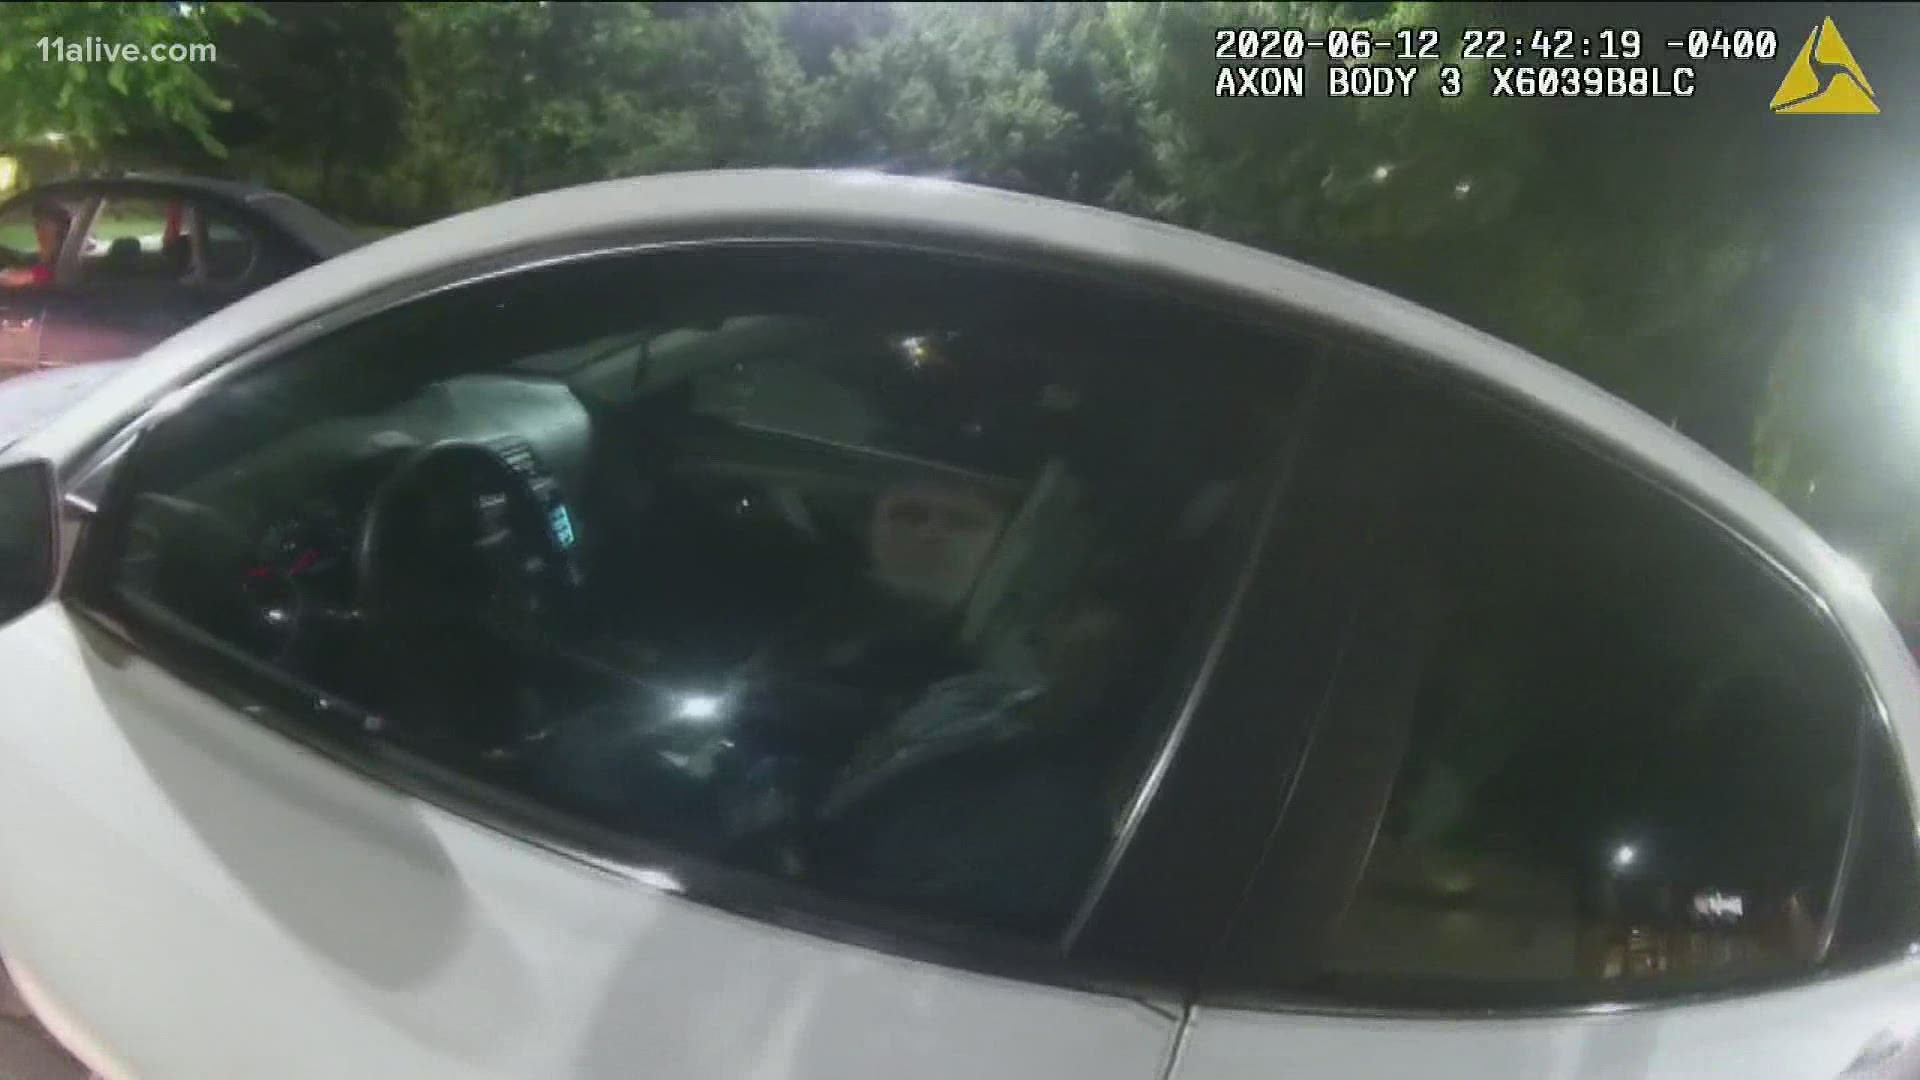 Brooks was sleep in his car when officers arrived.